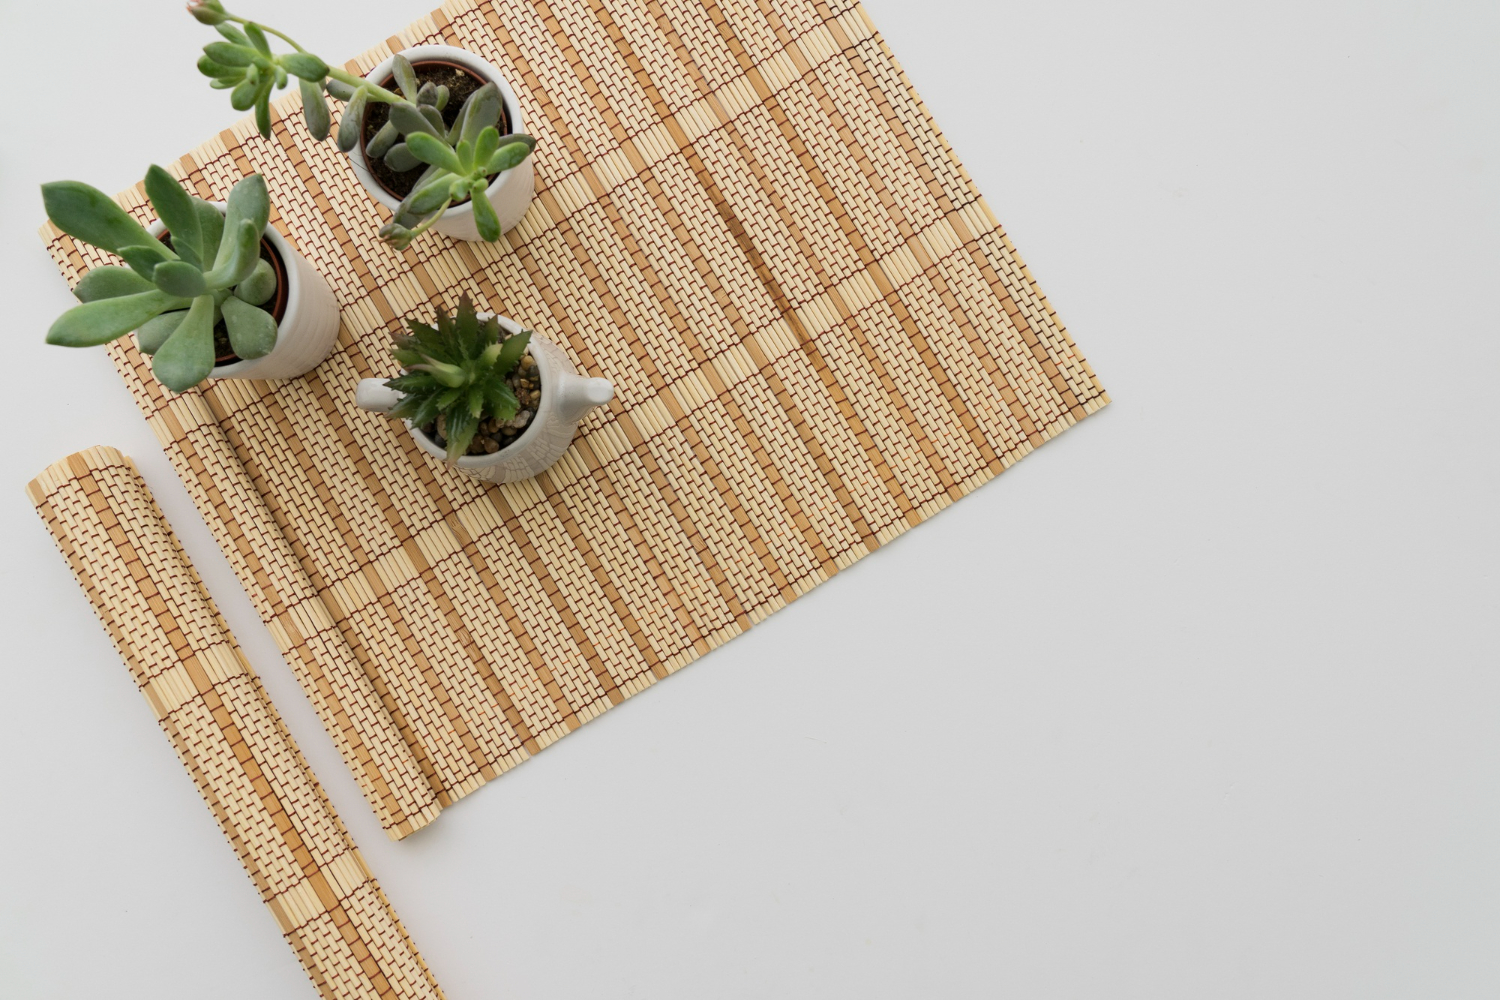 The Natural Elegance of Jute Woven Placemats: Adding Eco-Chic Charm to Your Table